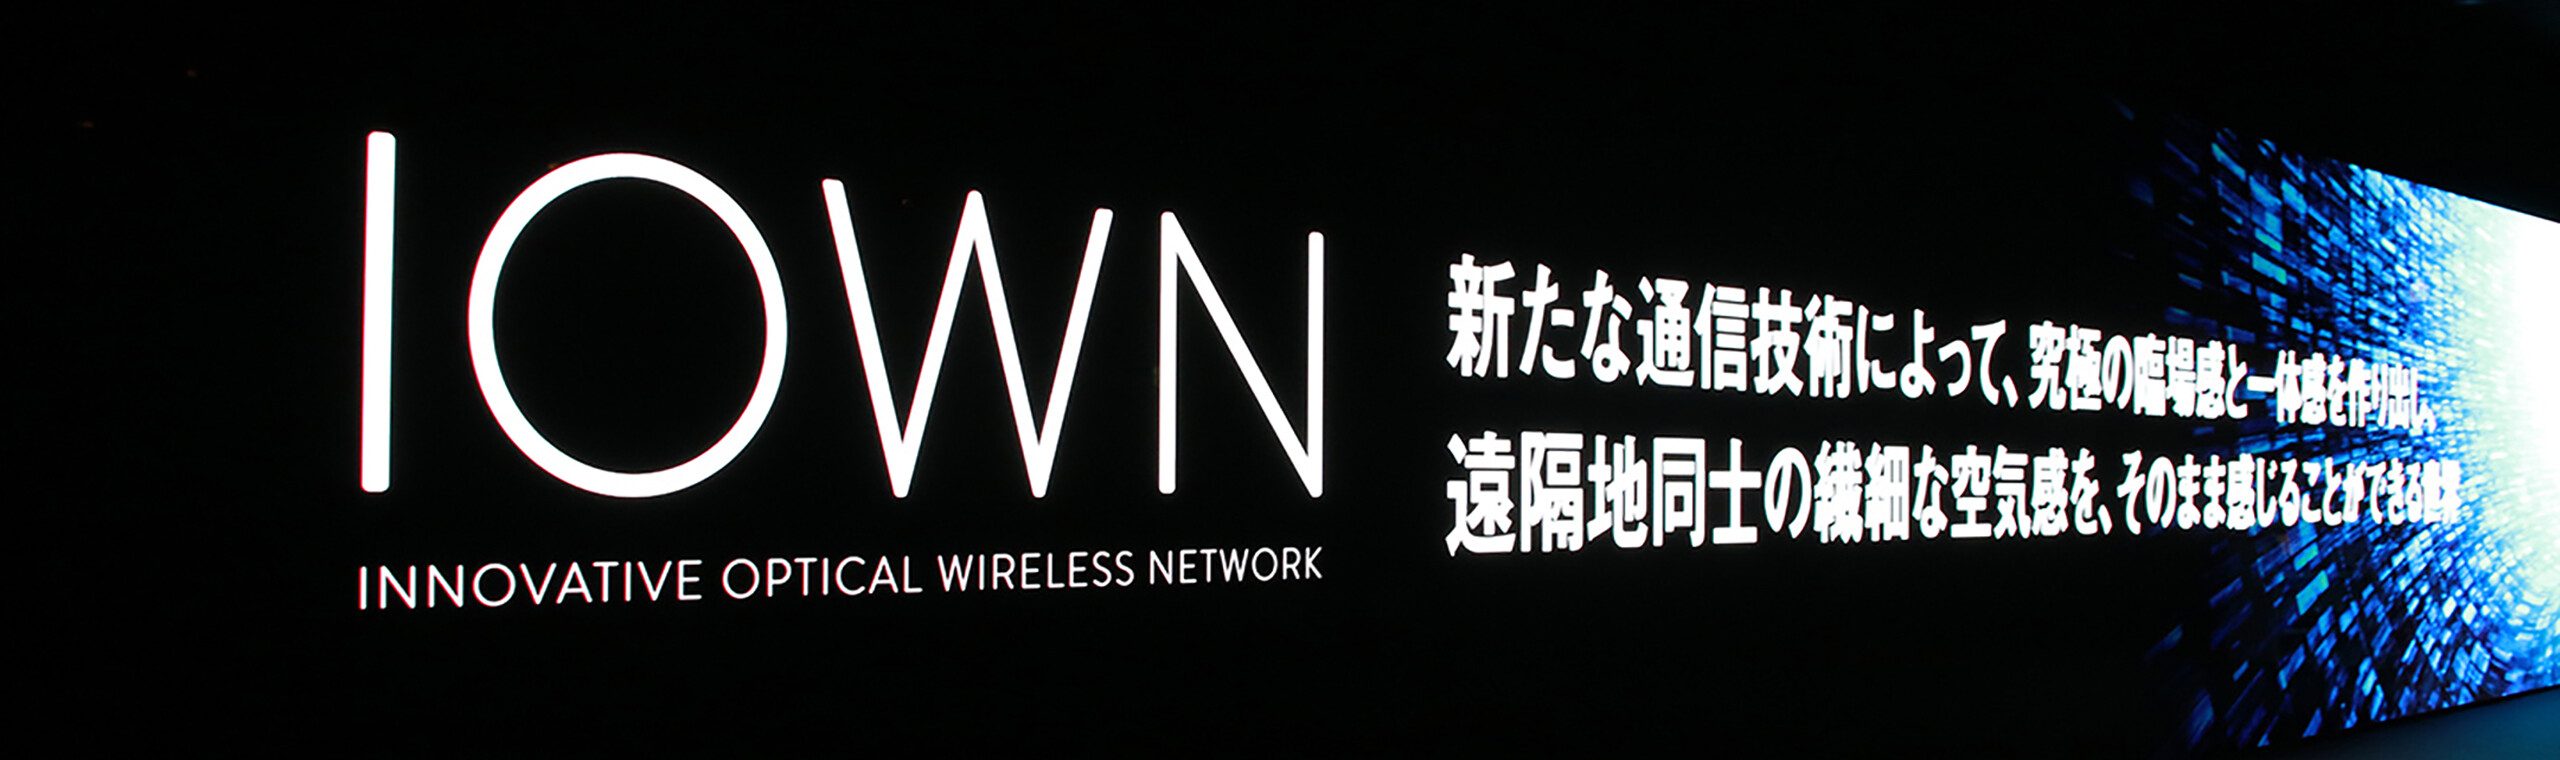 Acceleration in the Remote World: Limitless Innovation Made Possible  through IOWN, NTT STORY